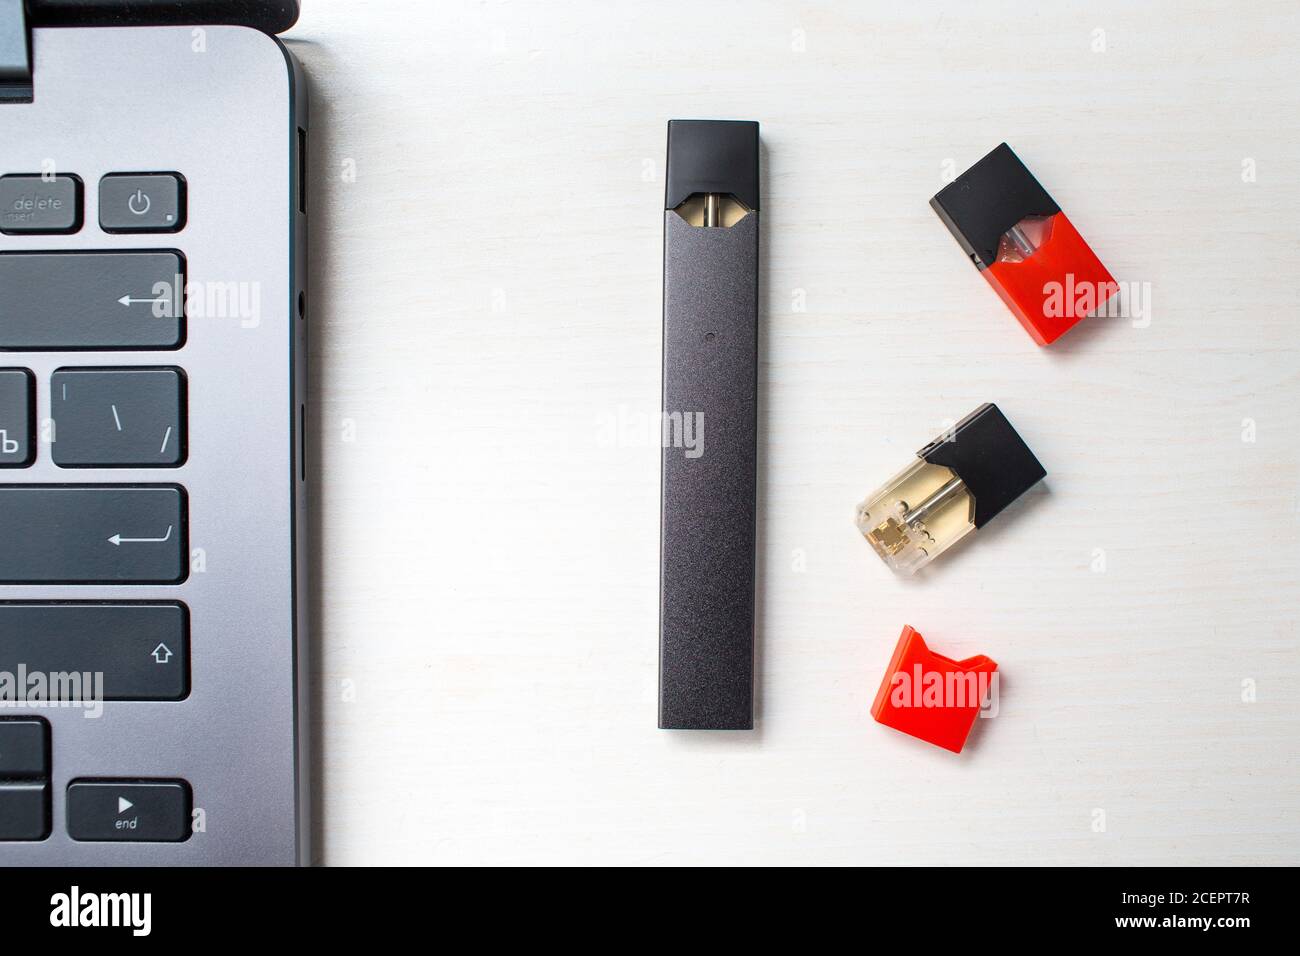 MOSCOW - 26 June 2020: Juul e-cigarette nicotine vapor stick and laptop Stock Photo